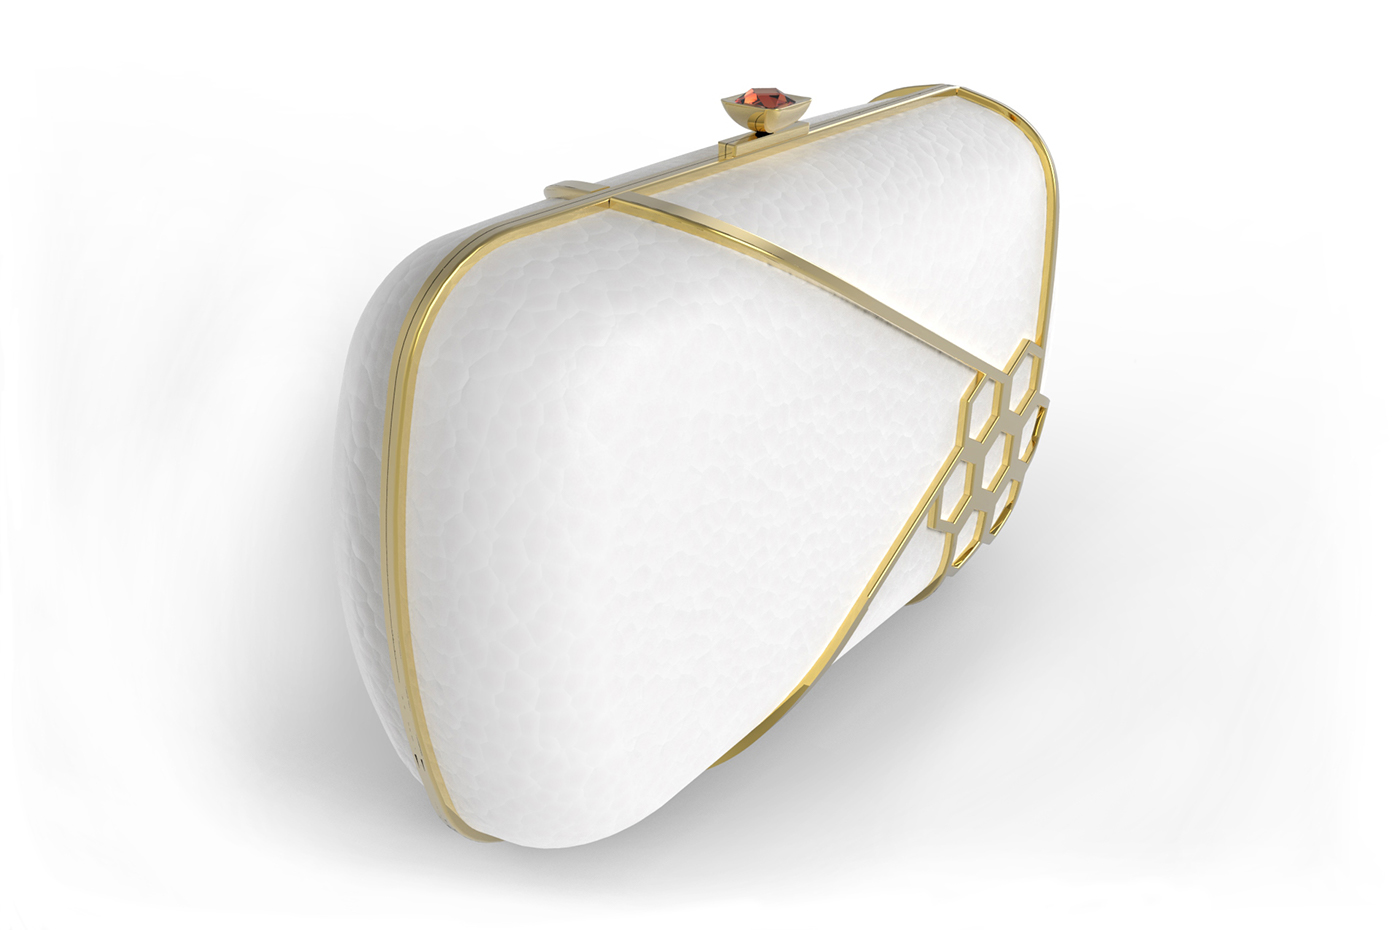 clutch design bee product bag jewelry bolsa joias gold leather White